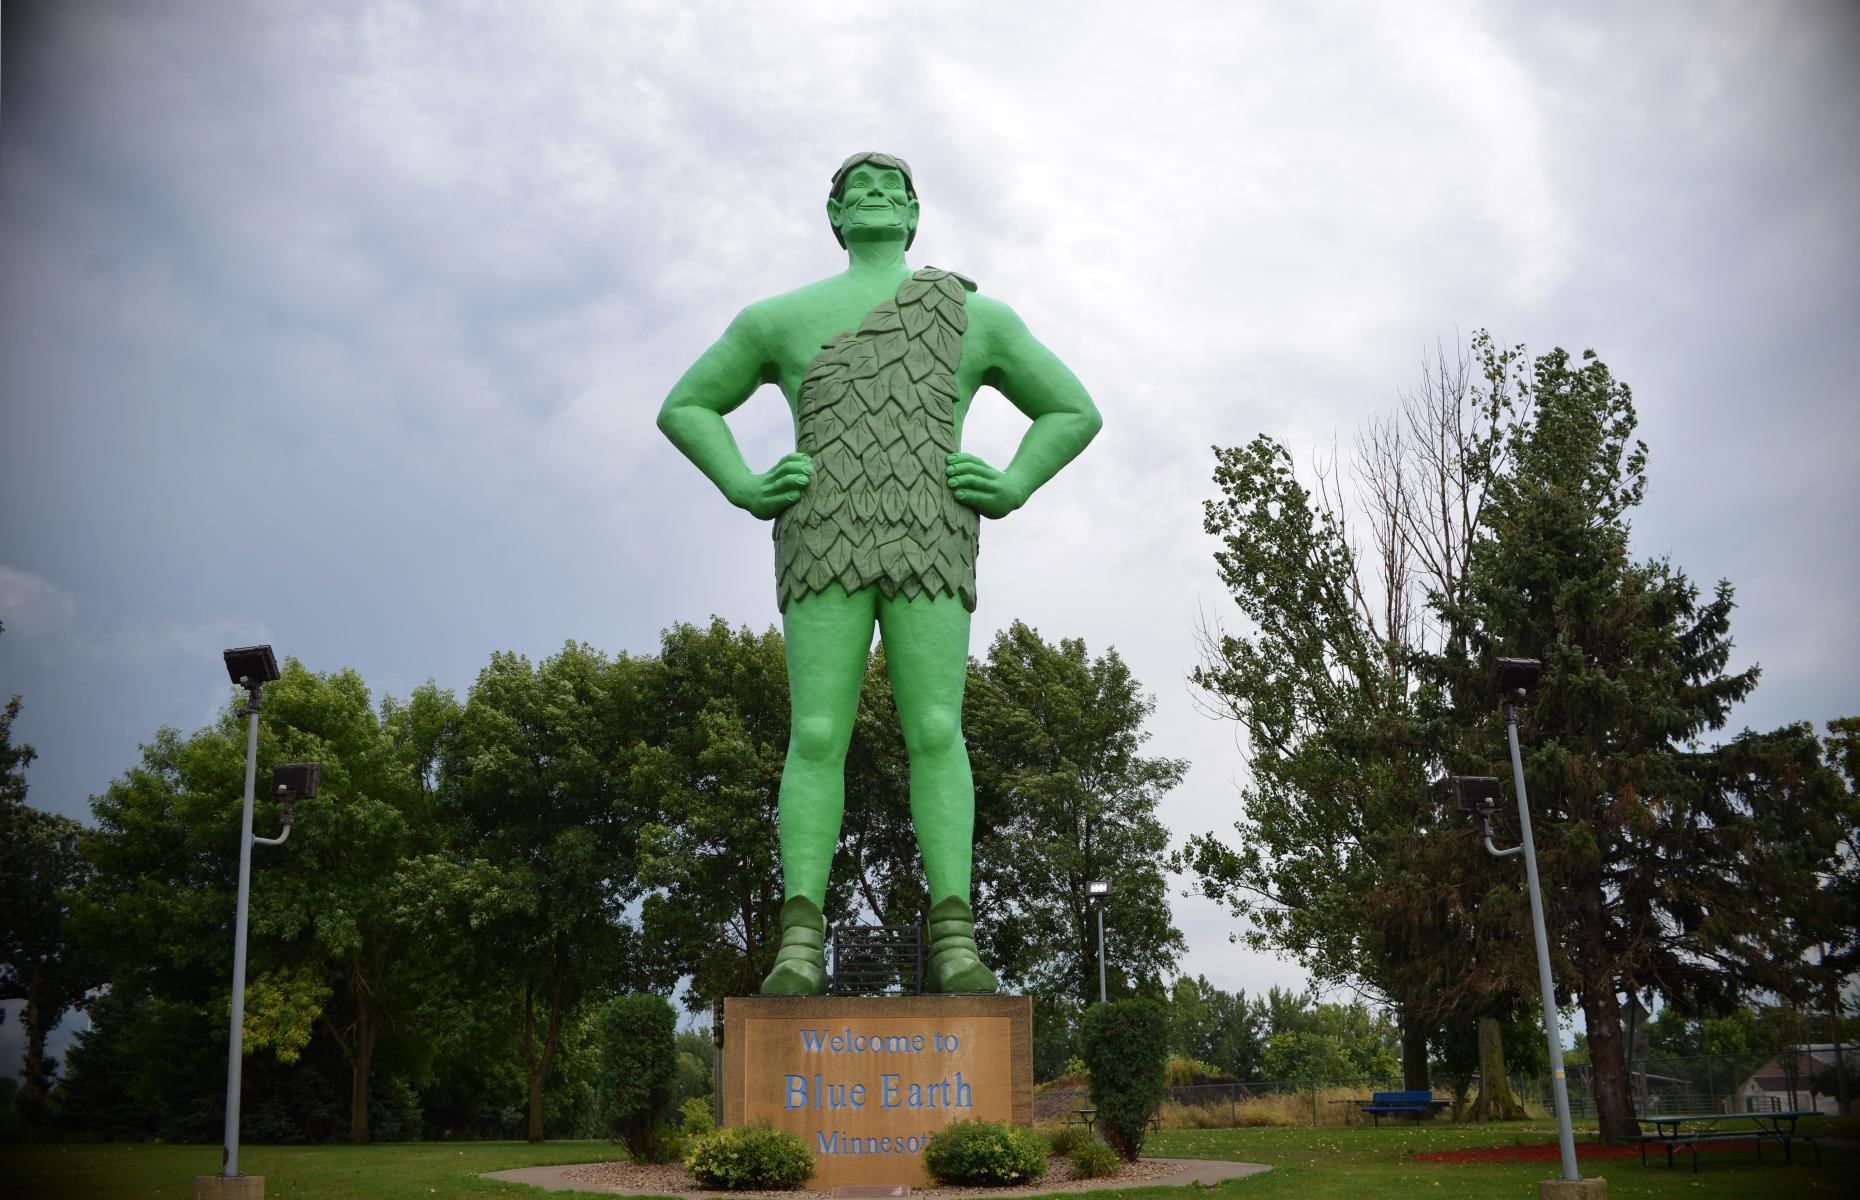 This 55-foot-tall fellow is pretty hard to miss. In fact, the Jolly Green Giant is probably the most famous resident in the town of Blue Earth. The fiberglass statue, next to a museum filled with Jolly Green Giant memorabilia, was built by former radio station owner Paul Hedberg, who used to interview road-trippers before gifting them a tin of Green Giant veg – a nod to the area’s canning factory.